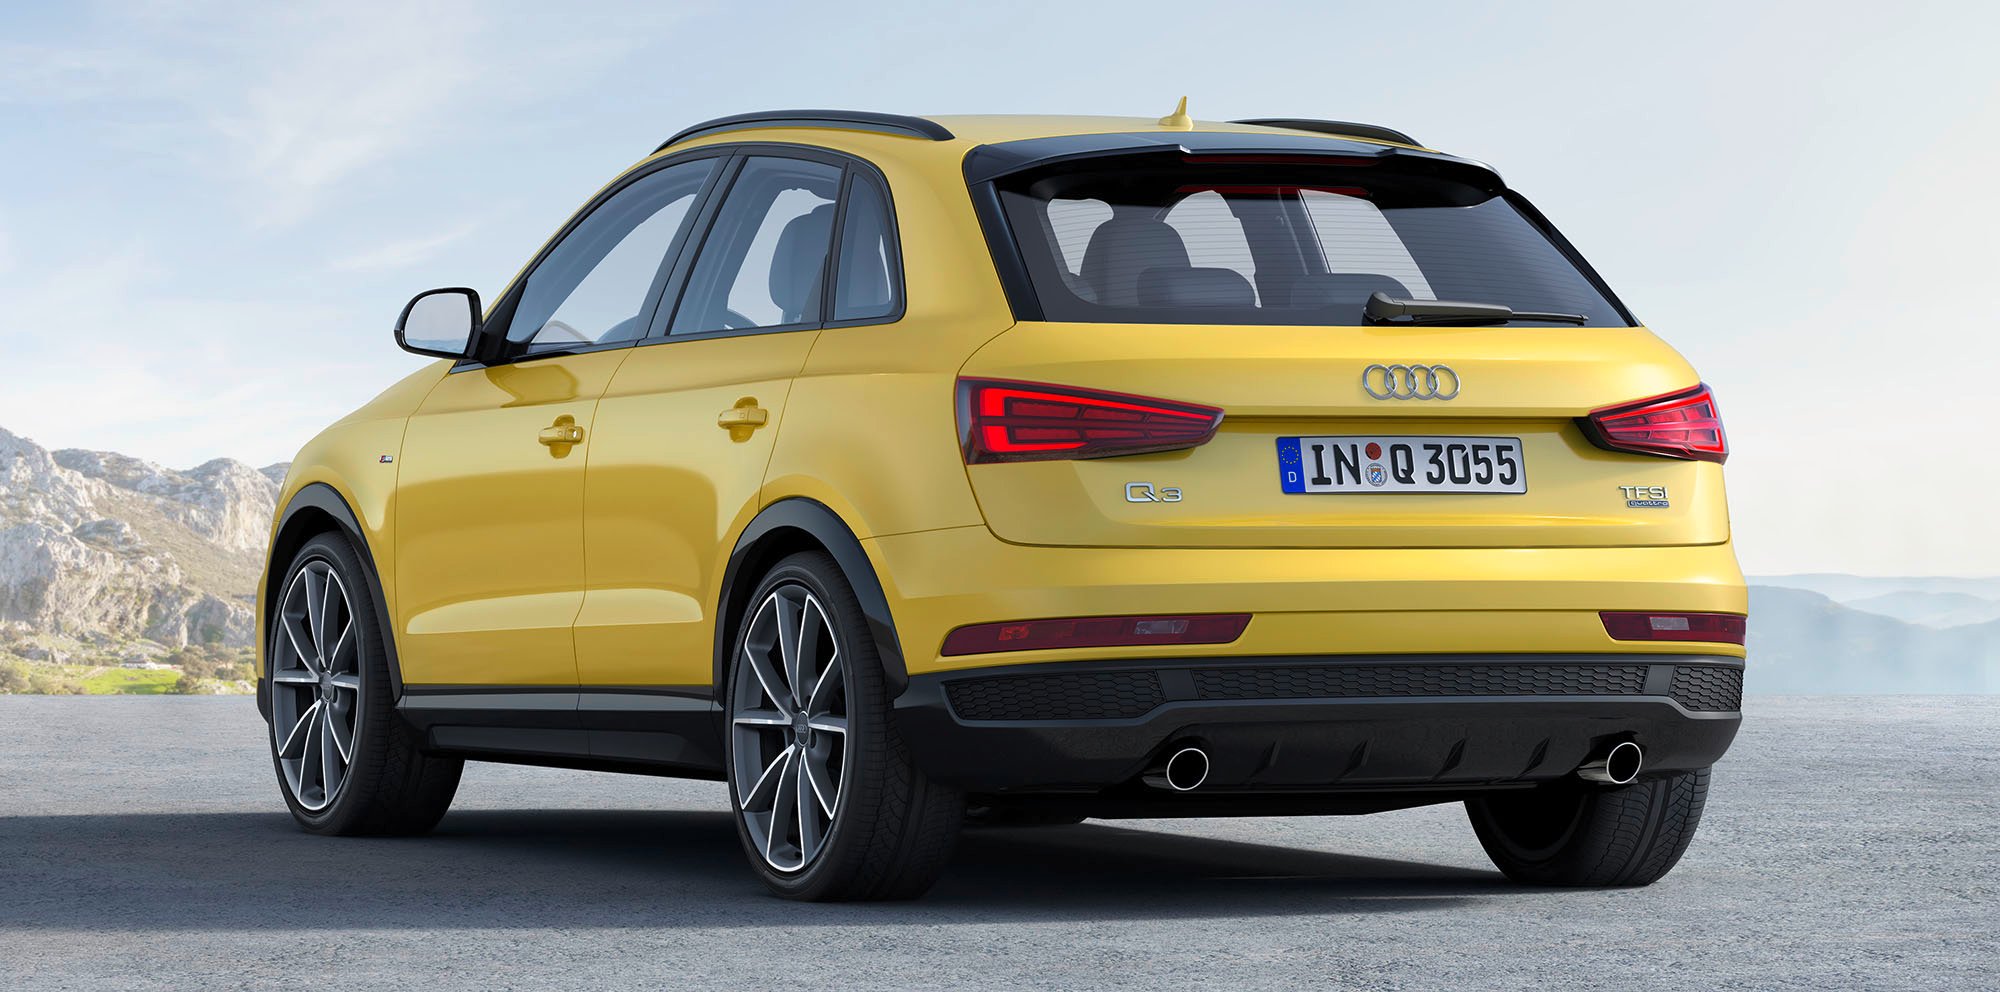 2017 Audi Q3 update and S Line Competition unveiled - Photos (1 of 7)